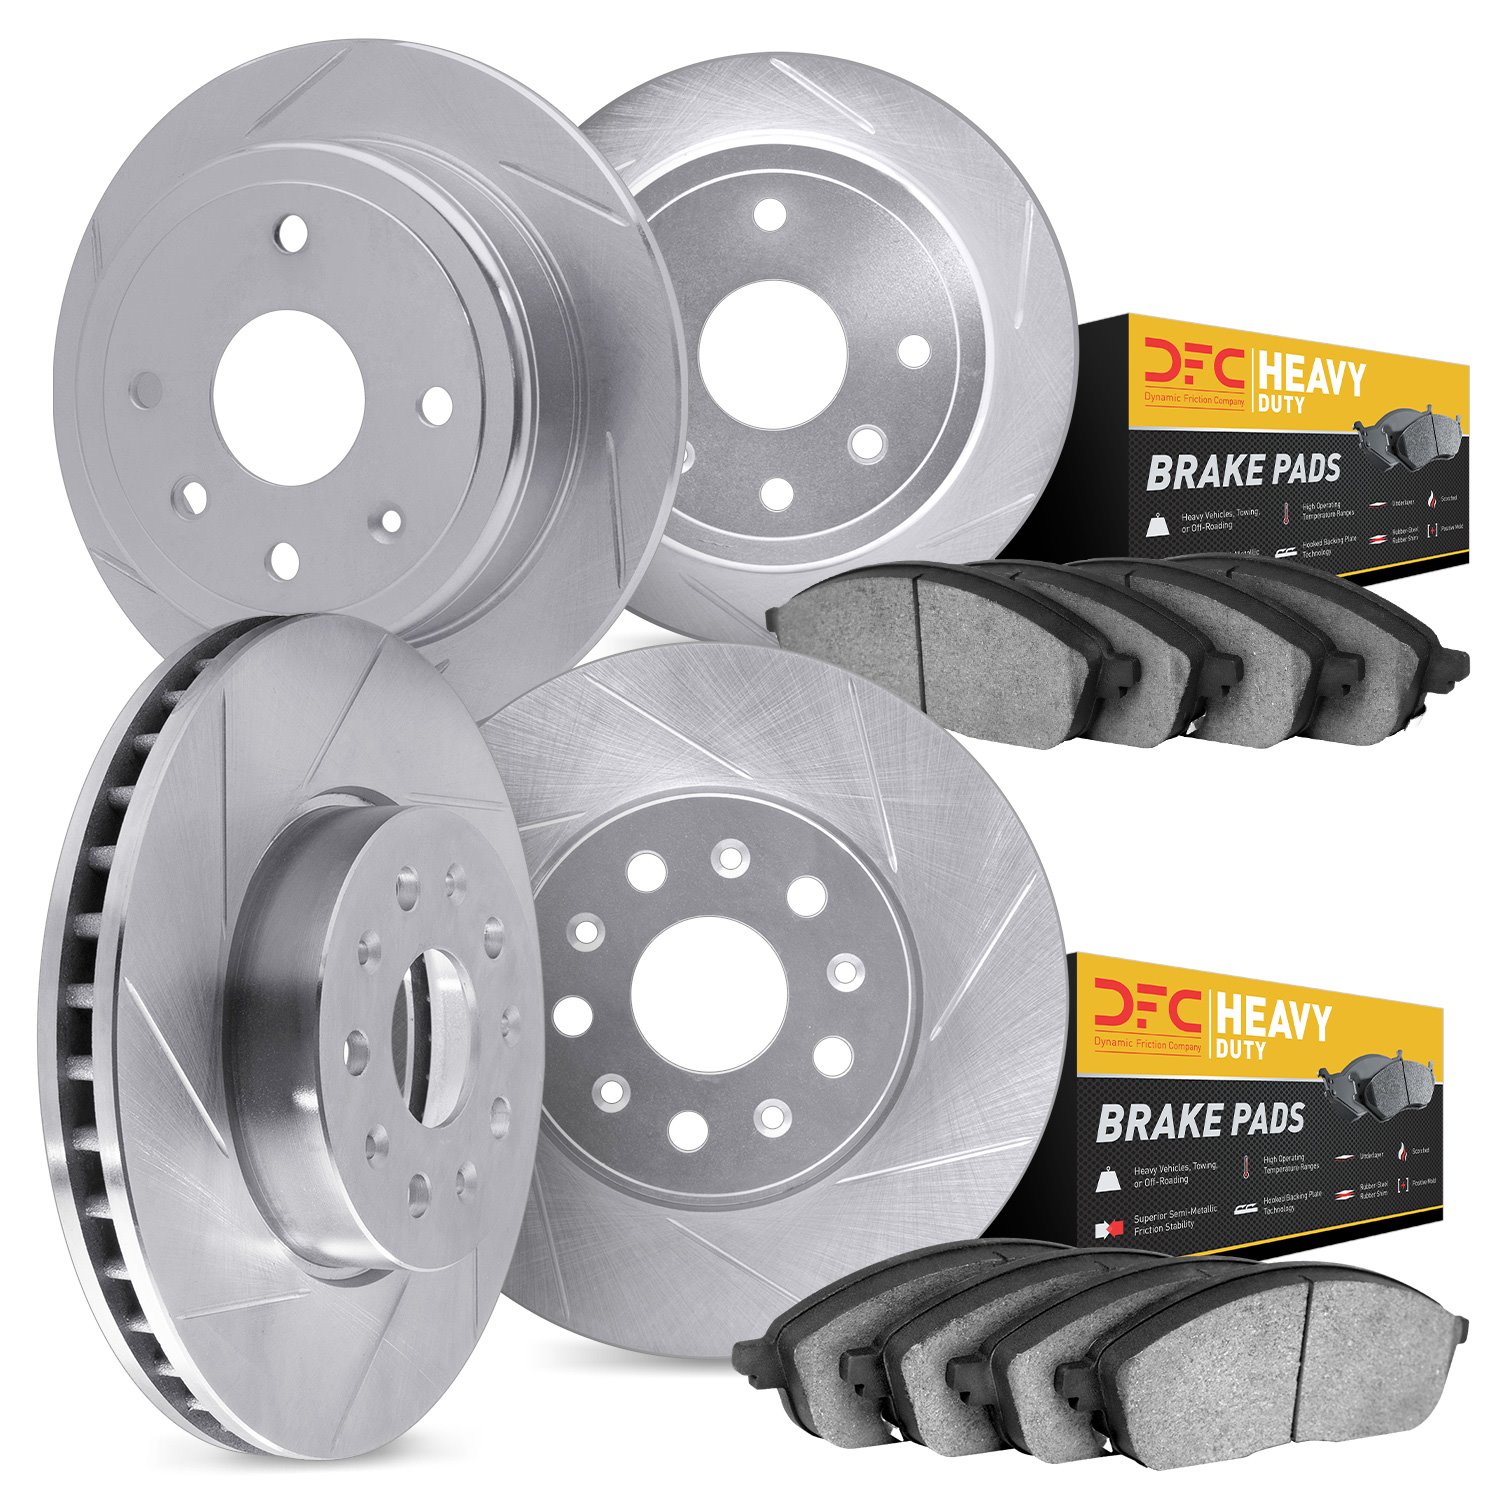 5204-54001 Slotted Brake Rotors w/Heavy-Duty Brake Pads Kits [Silver], 2006-2010 Ford/Lincoln/Mercury/Mazda, Position: Front and